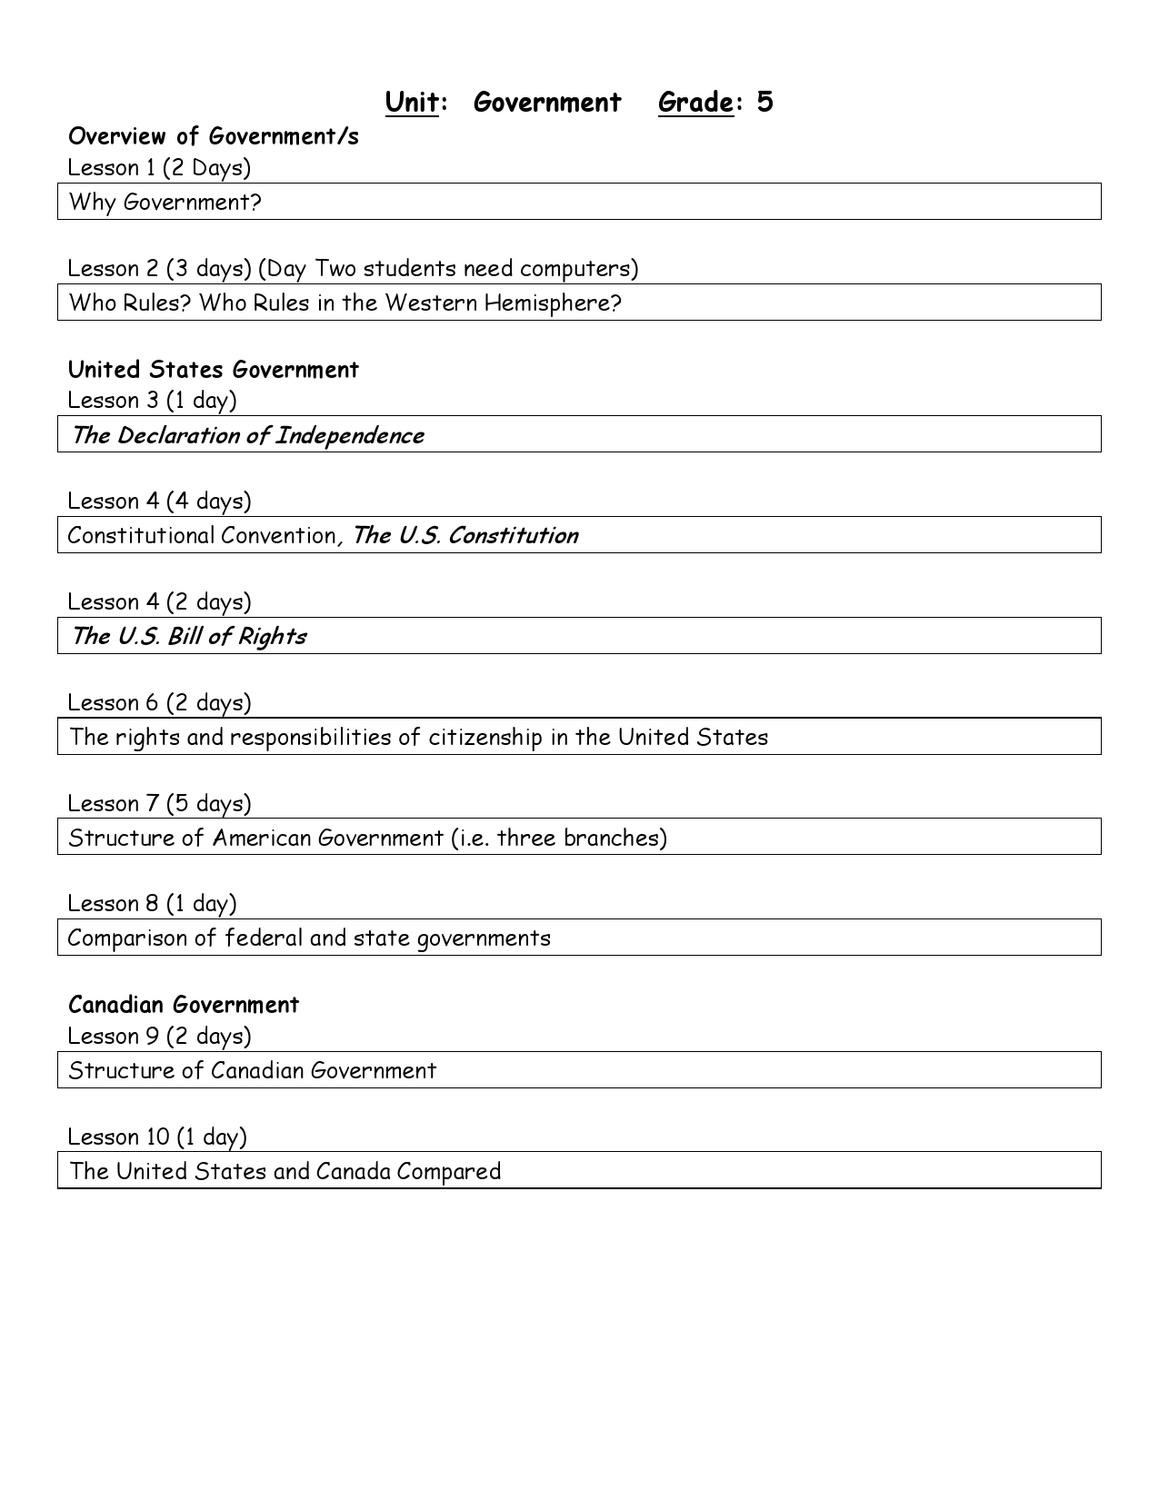 Branches Of Government Worksheet Pdf Grade 5 Government Unit by Half Hollow Hills Schools issuu